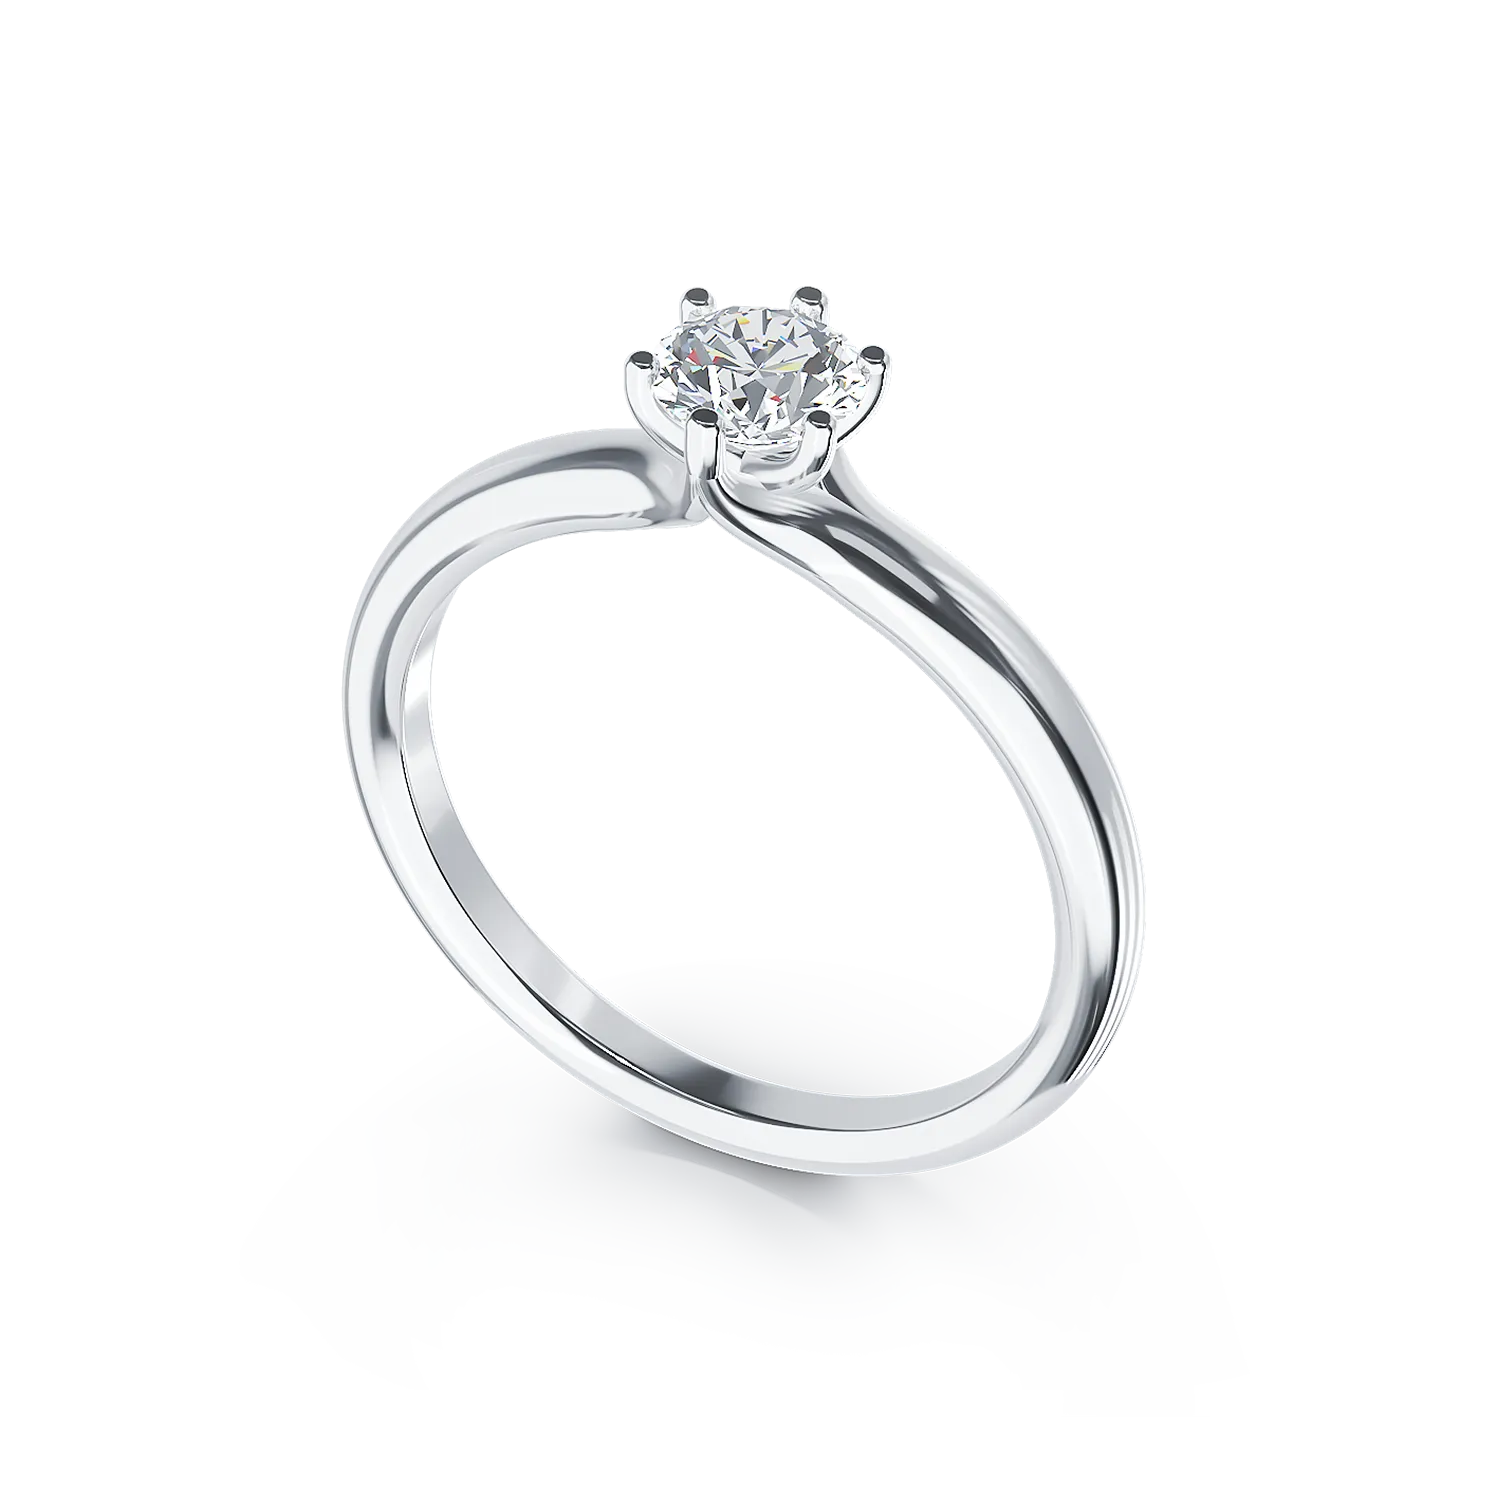 18K white gold engagement ring with a 0.4ct solitaire diamond